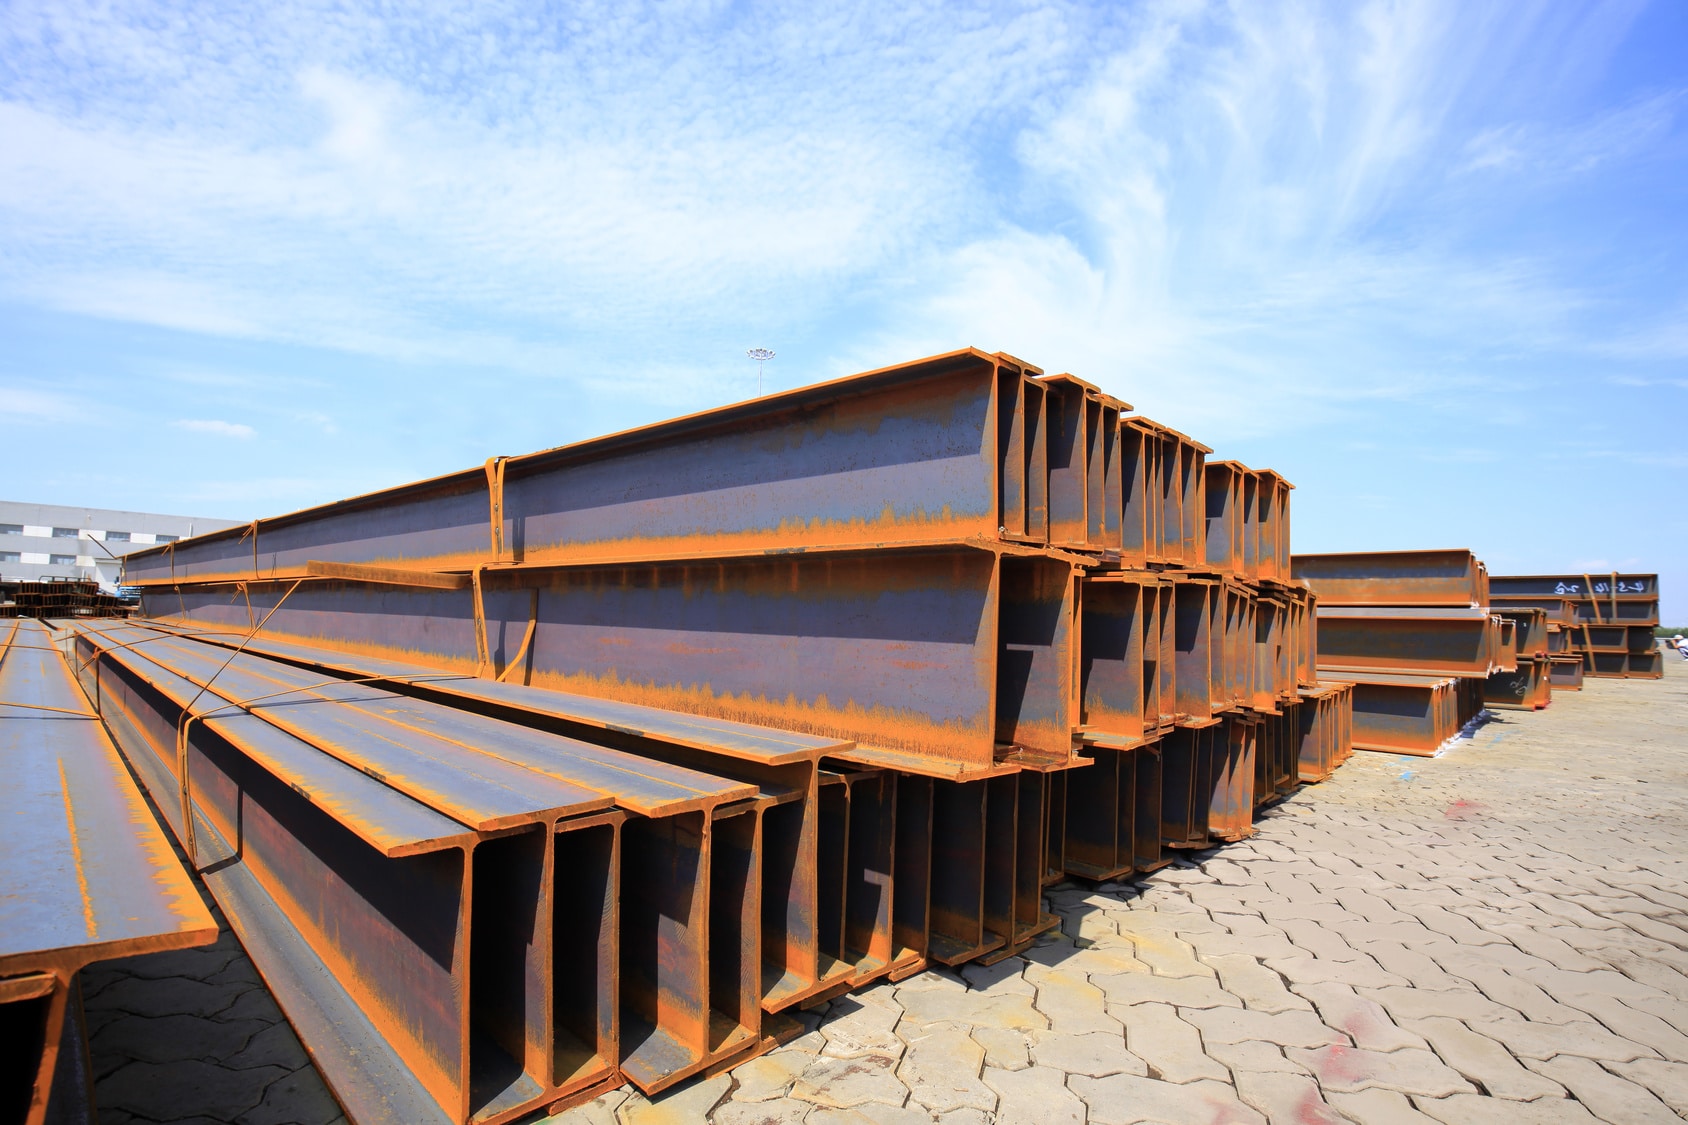 Channel steel for scrap processing